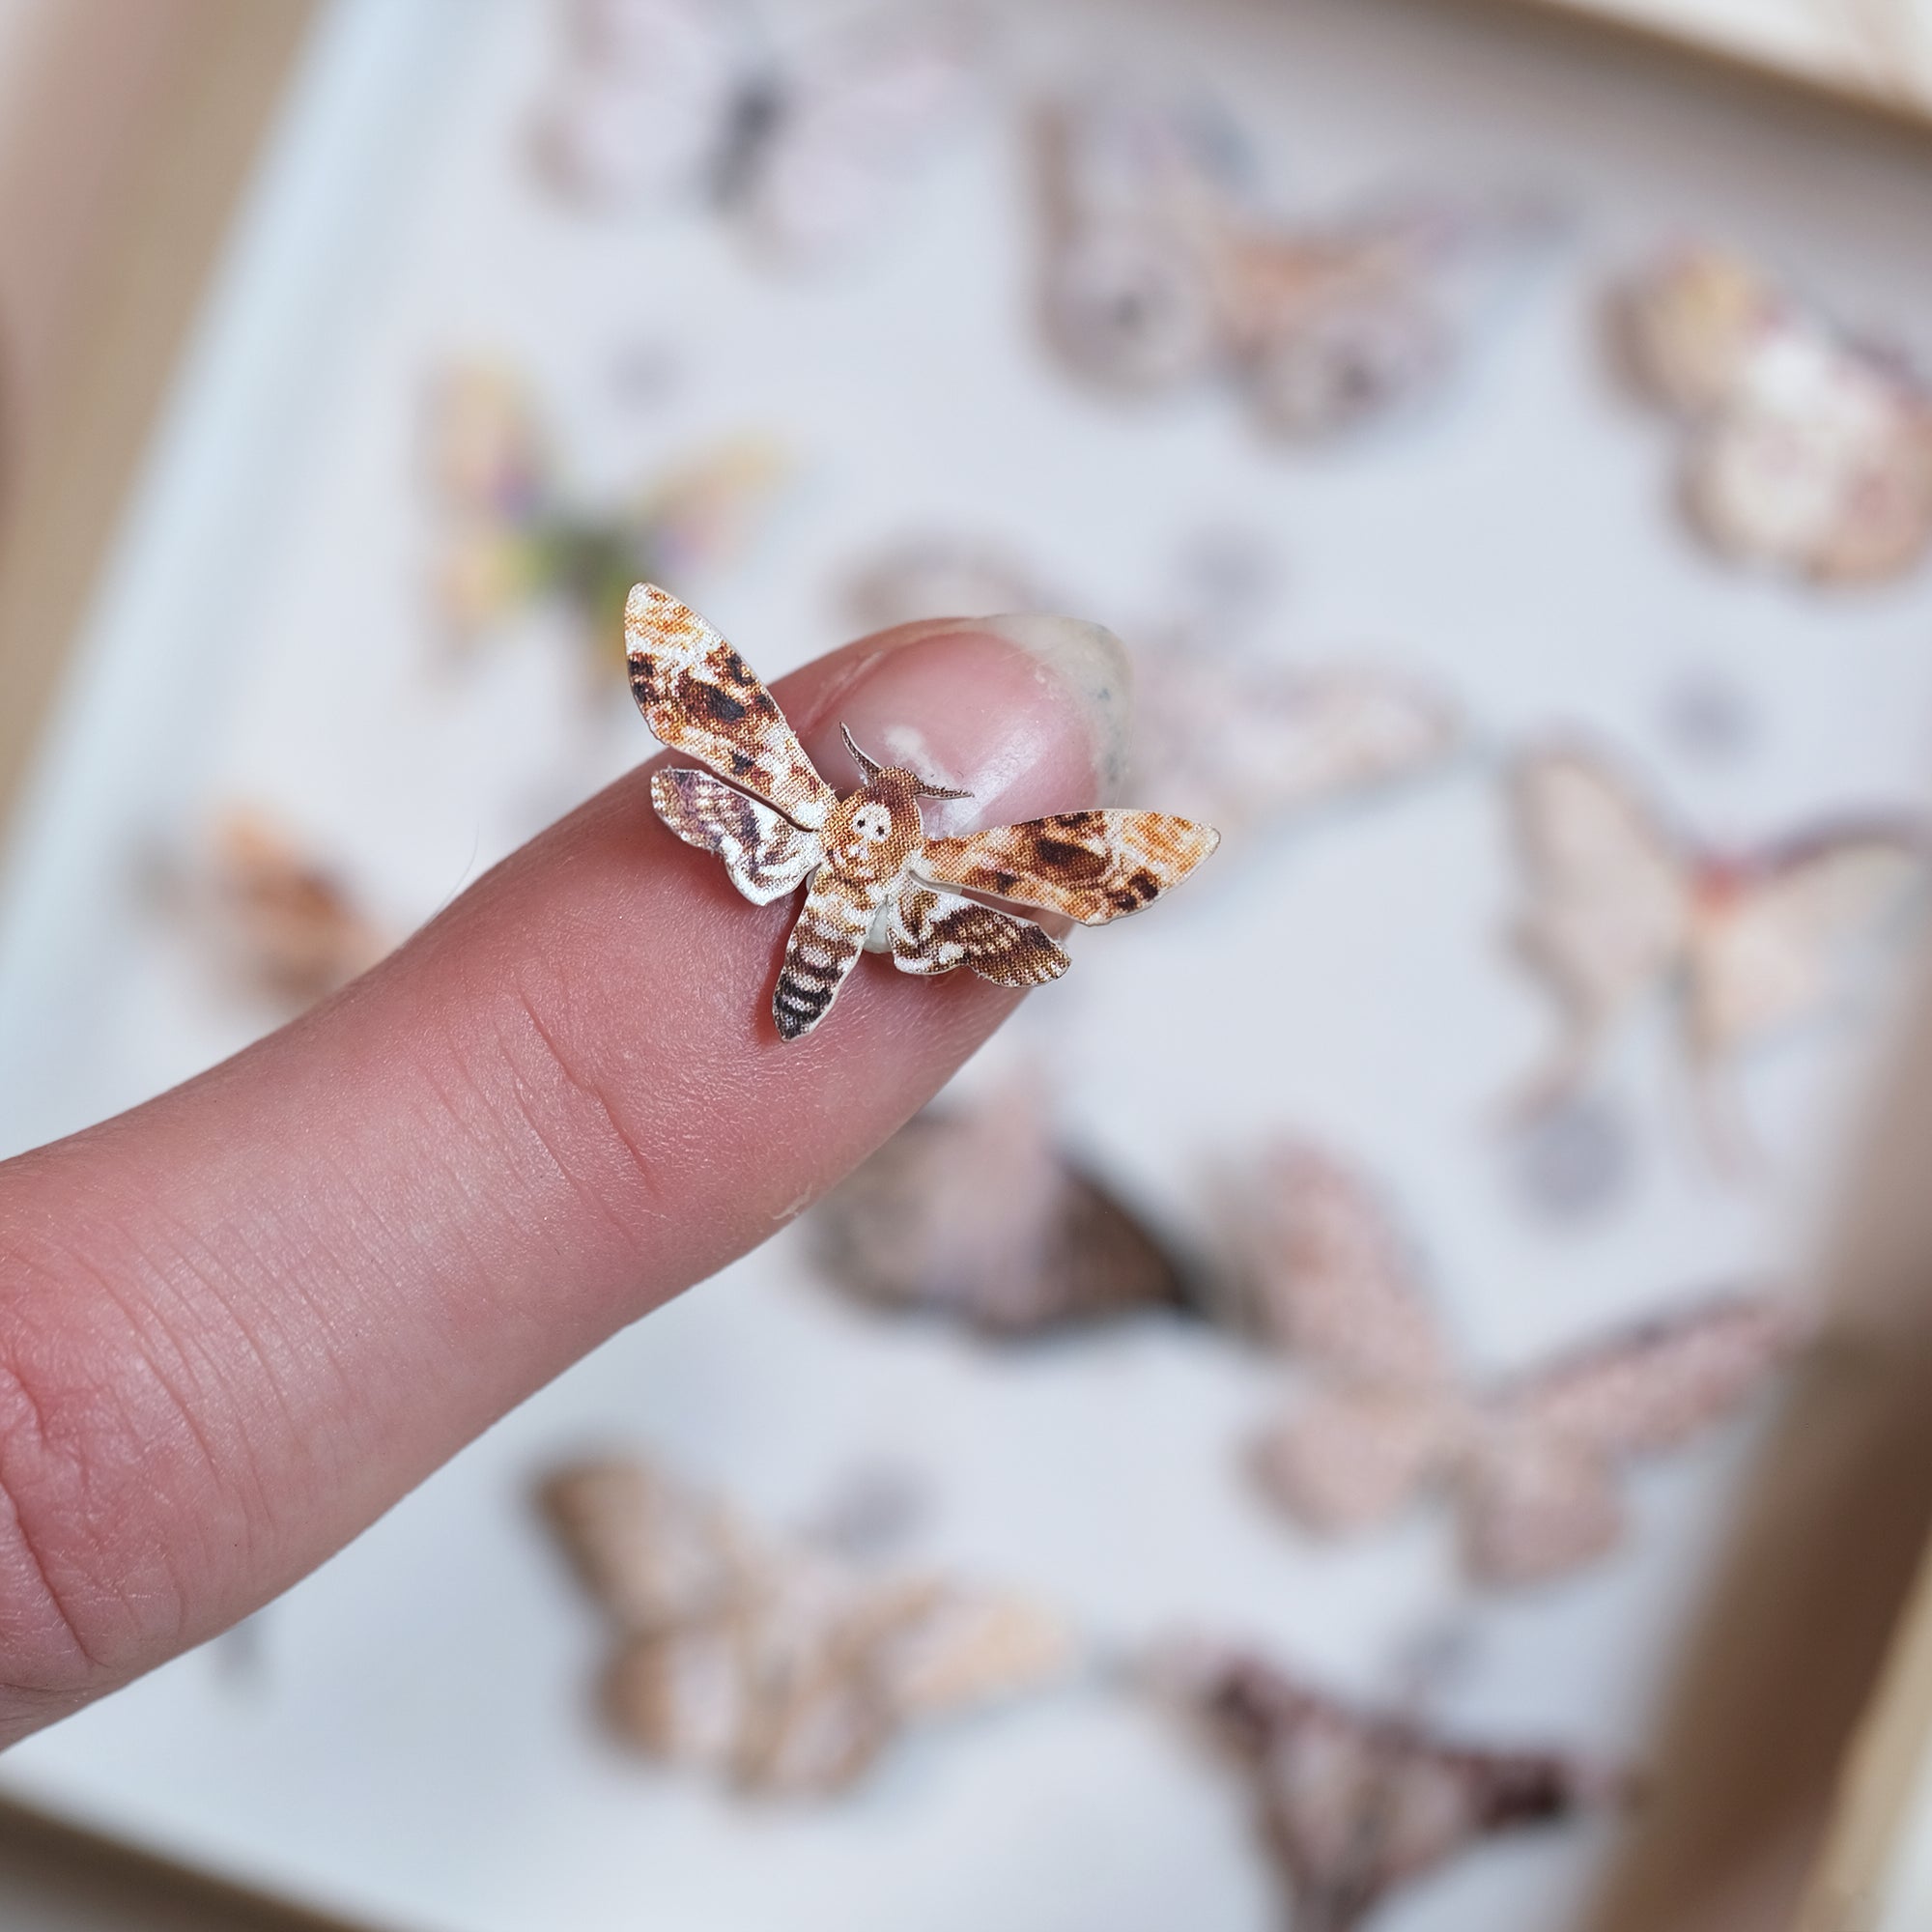 💫New💫 Death's-Head Moth Micro Collection Artist Wholesale